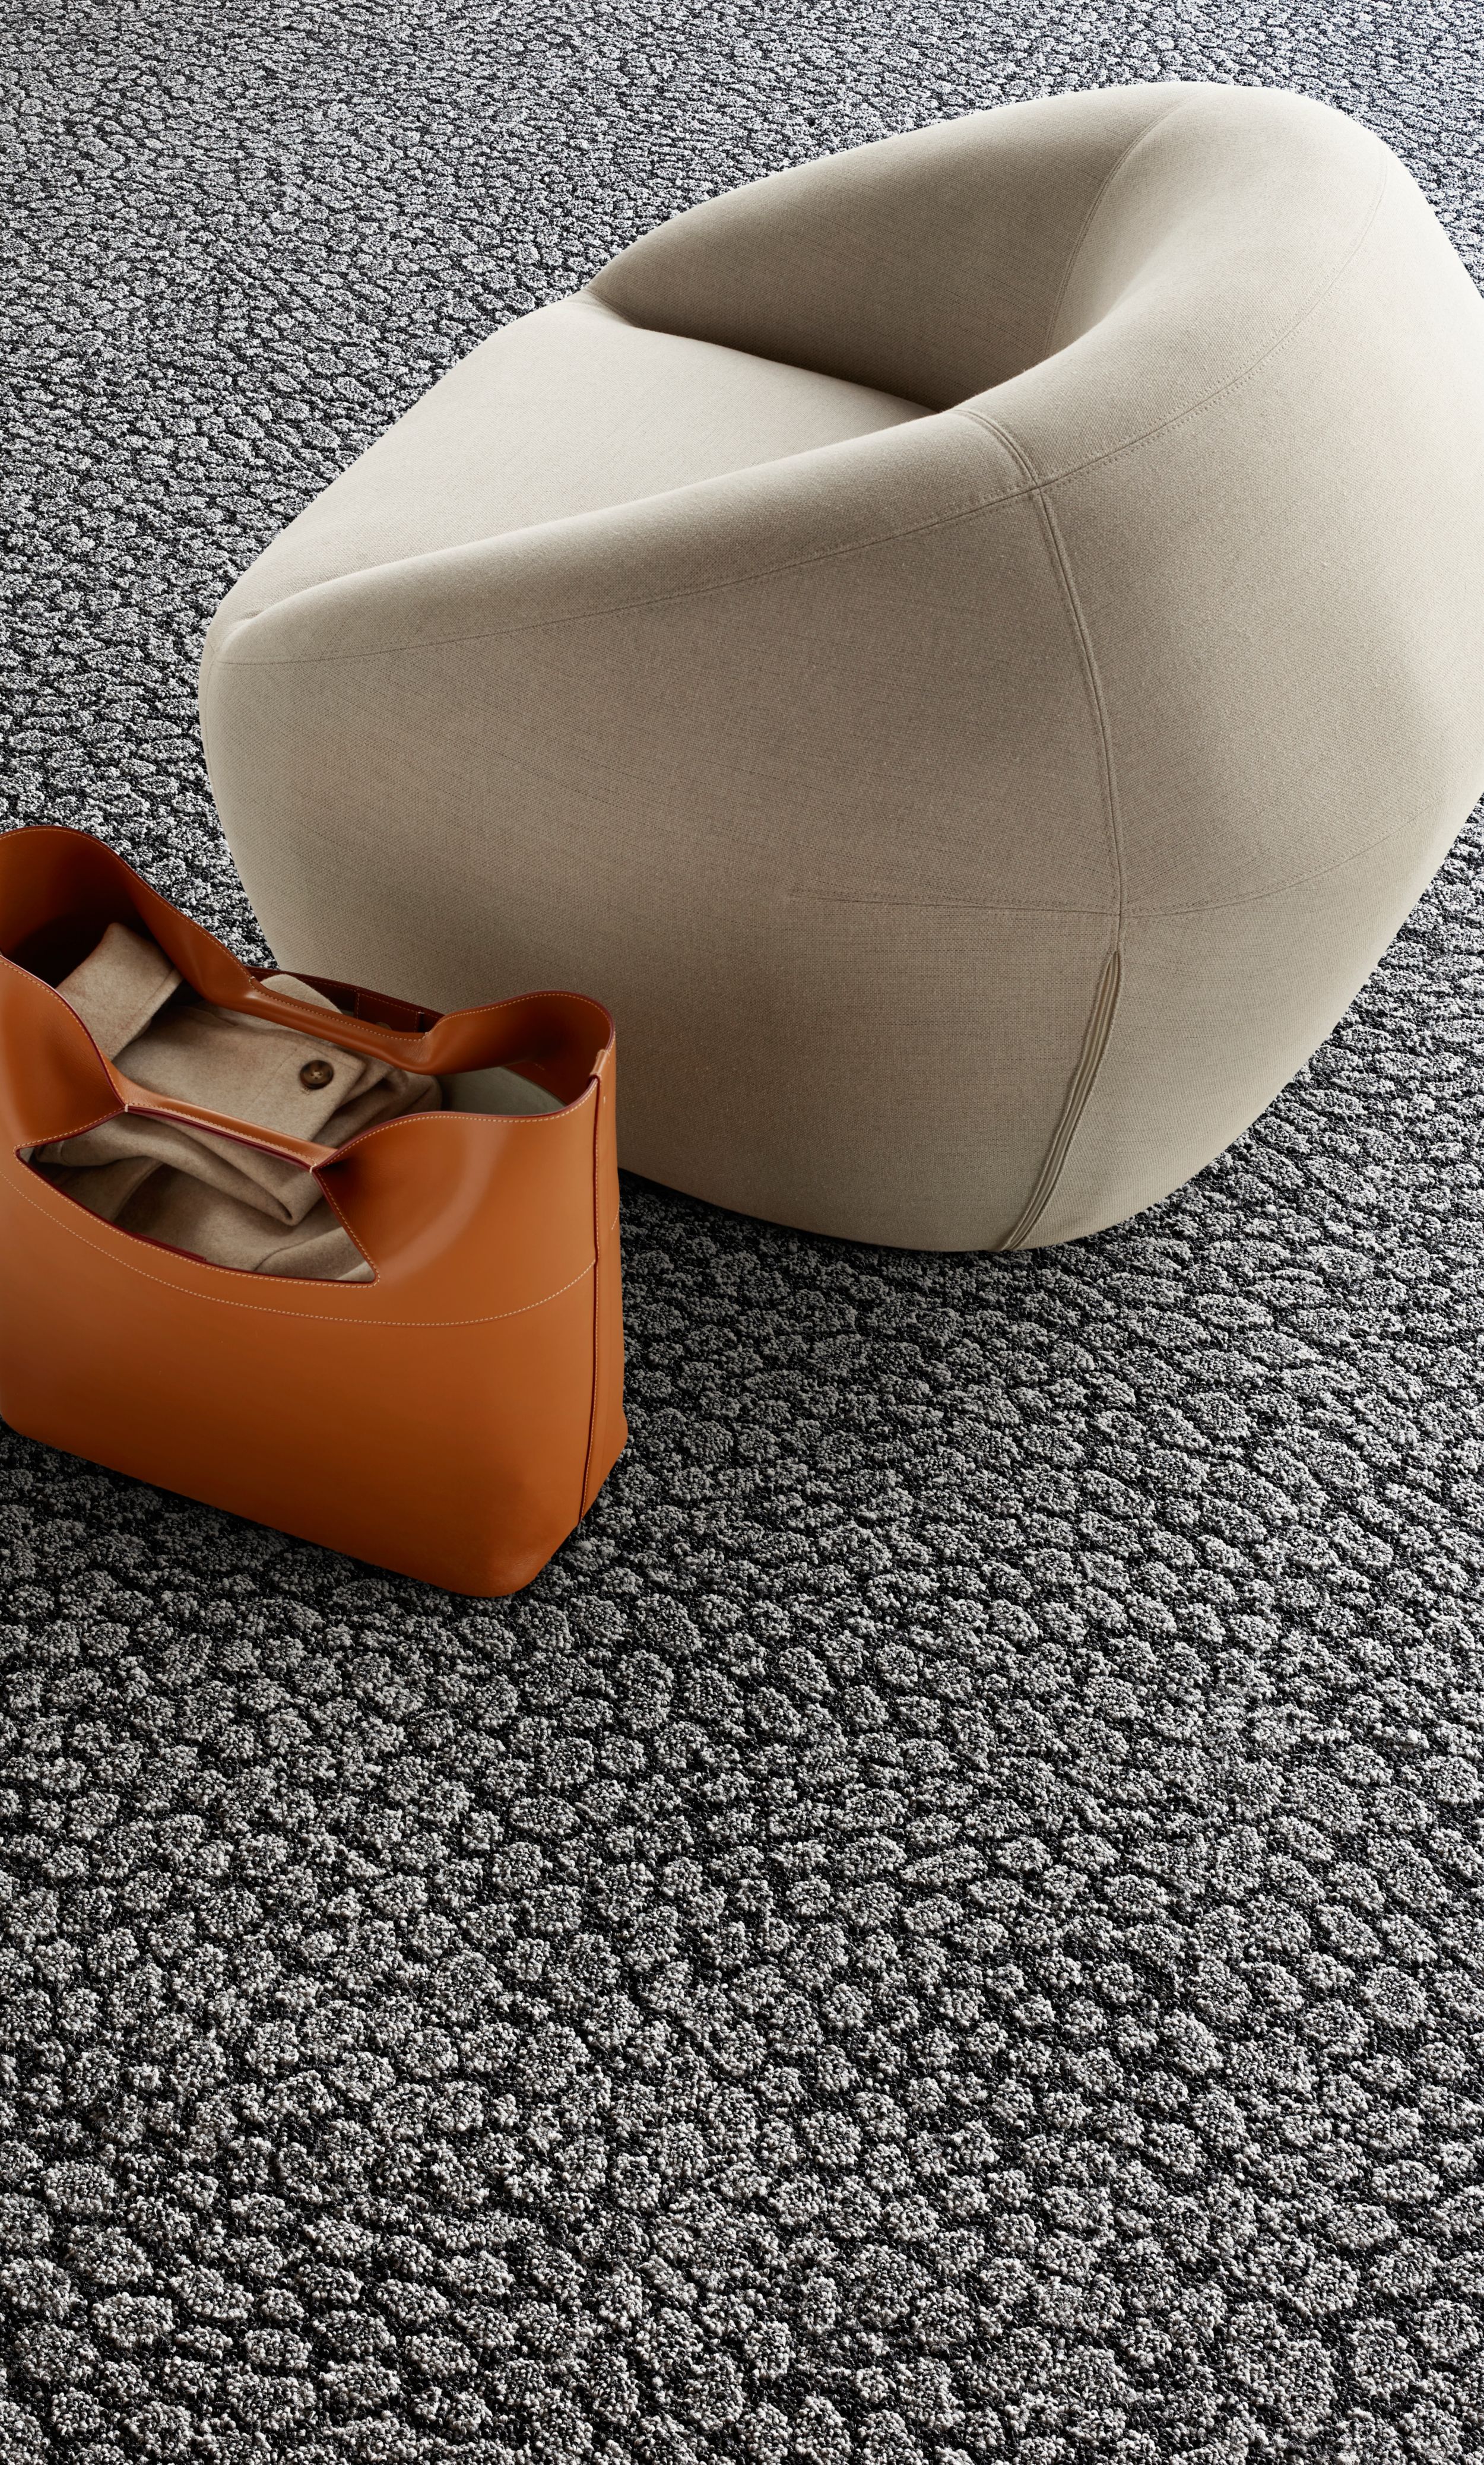 Interface E611 carpet tile detail with low chair and orange tote imagen número 2